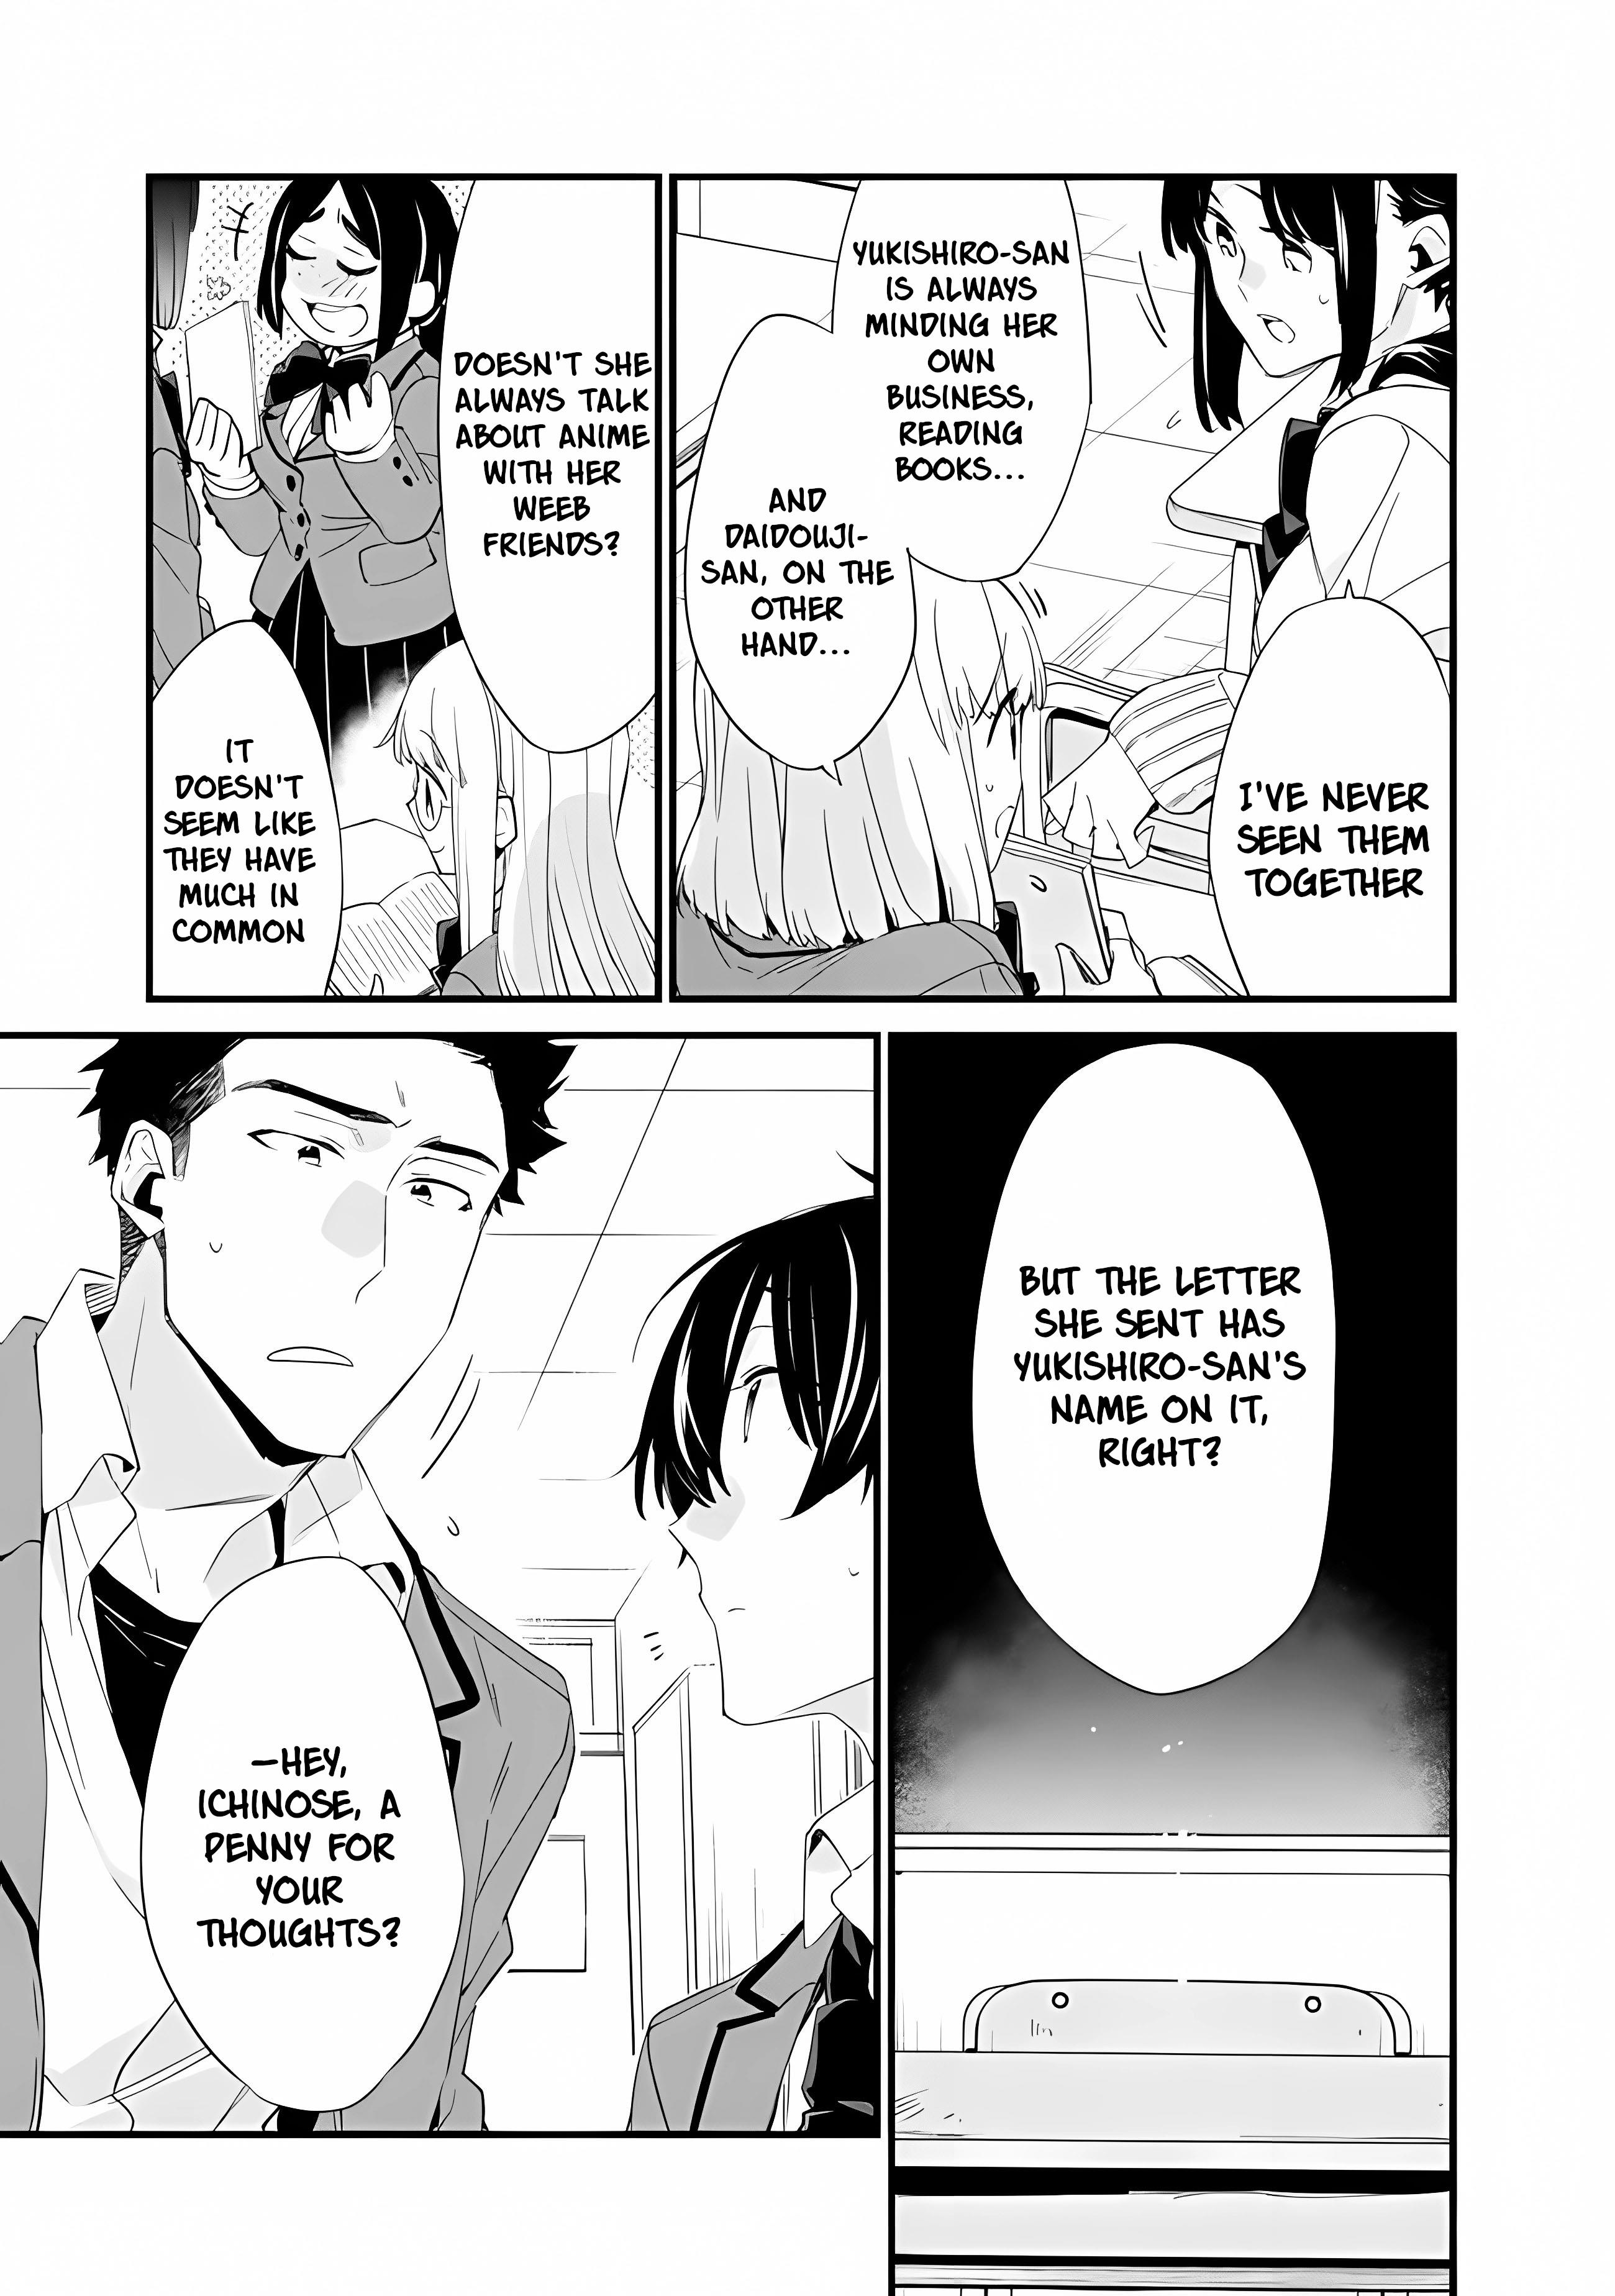 I’M Sick And Tired Of My Childhood Friend’S, Now Girlfriend’S, Constant Abuse So I Broke Up With Her - Page 4